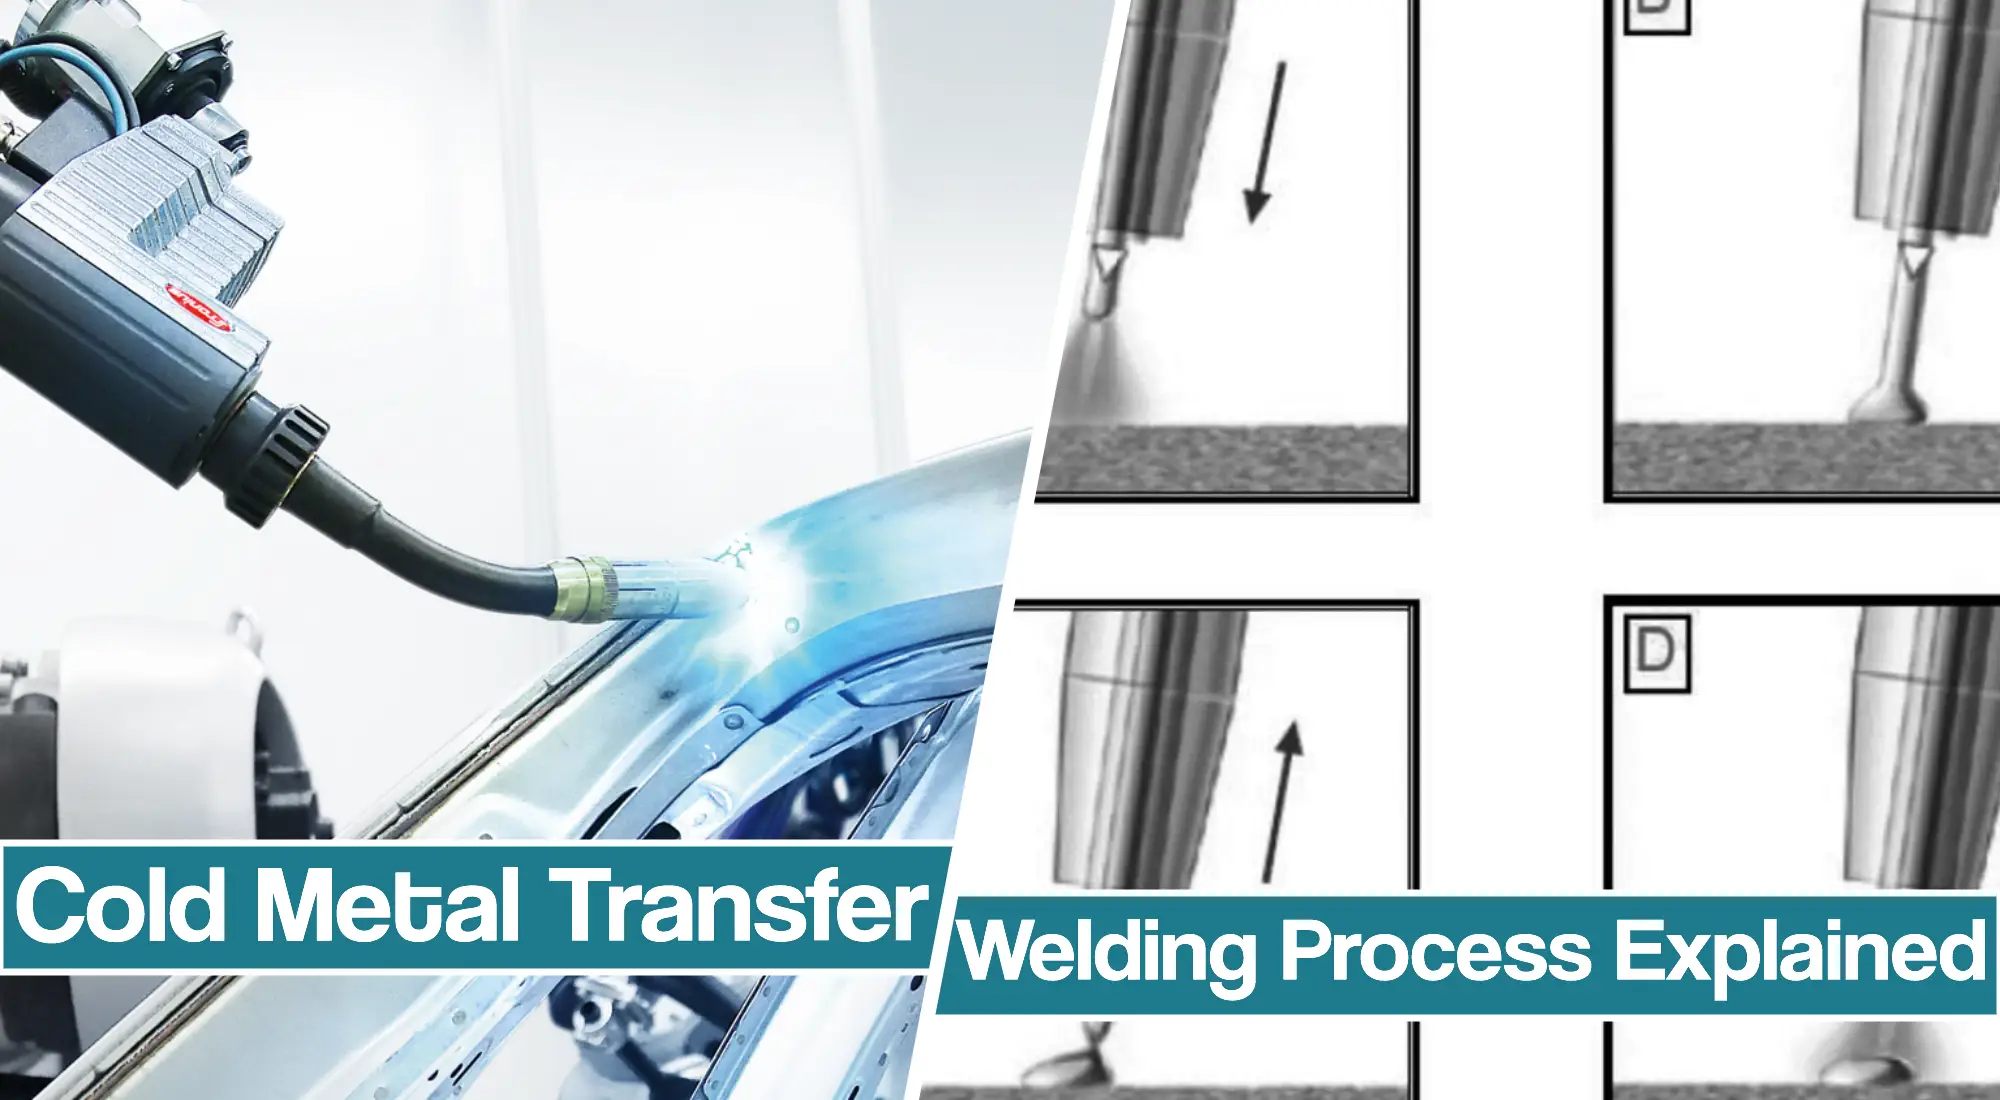 Cold metal transfer welding [CMT] – How it works